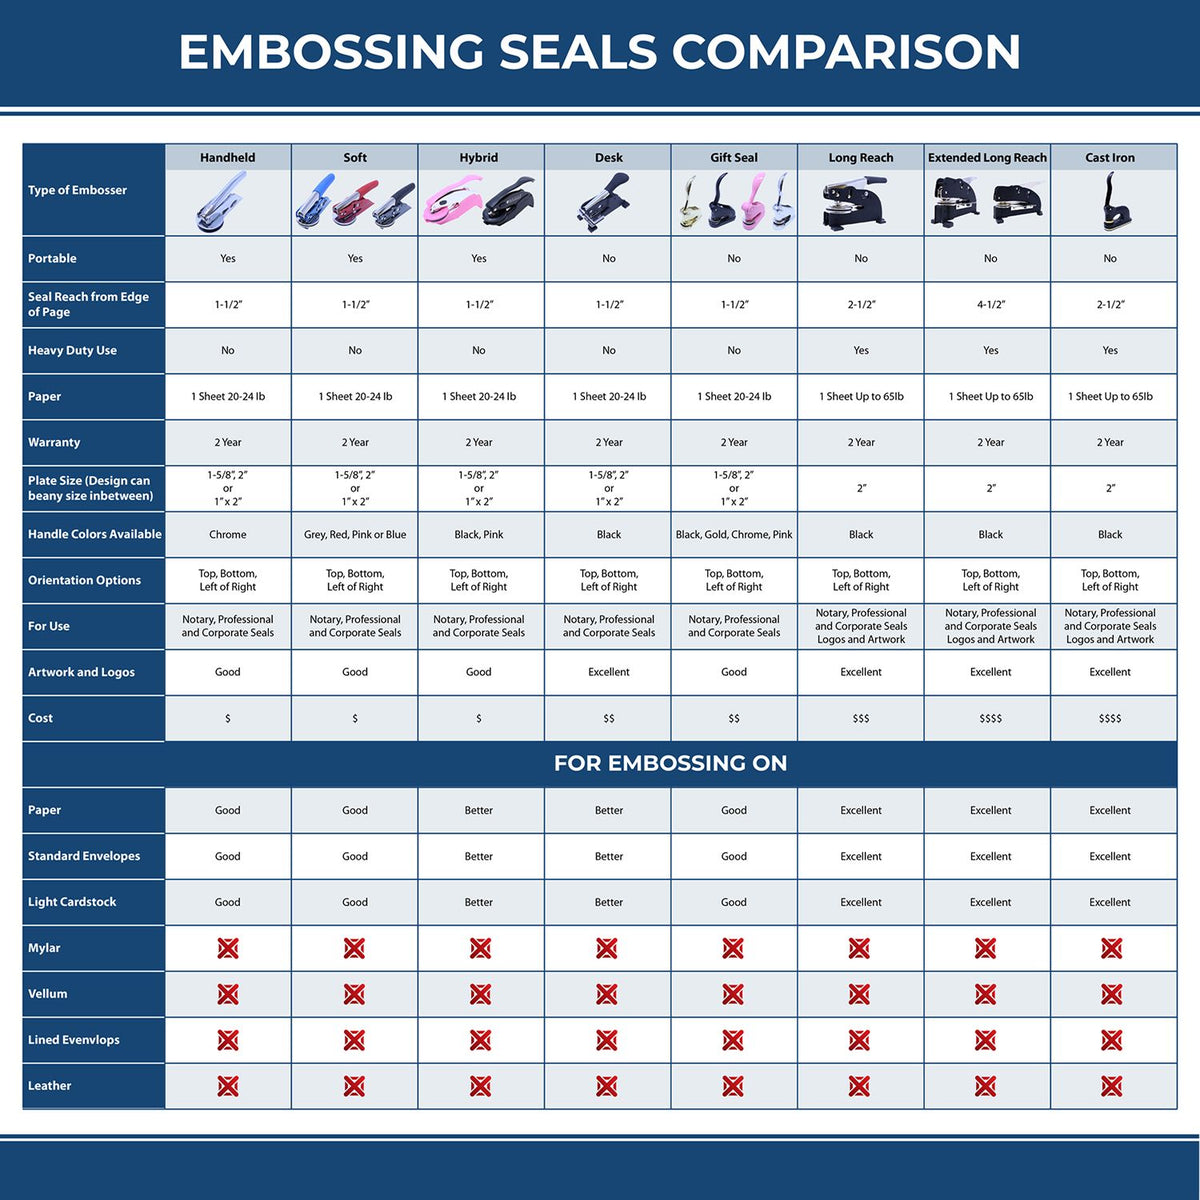 A comparison chart for the different types of mount models available for the Soft Pocket Oklahoma Landscape Architect Embosser.